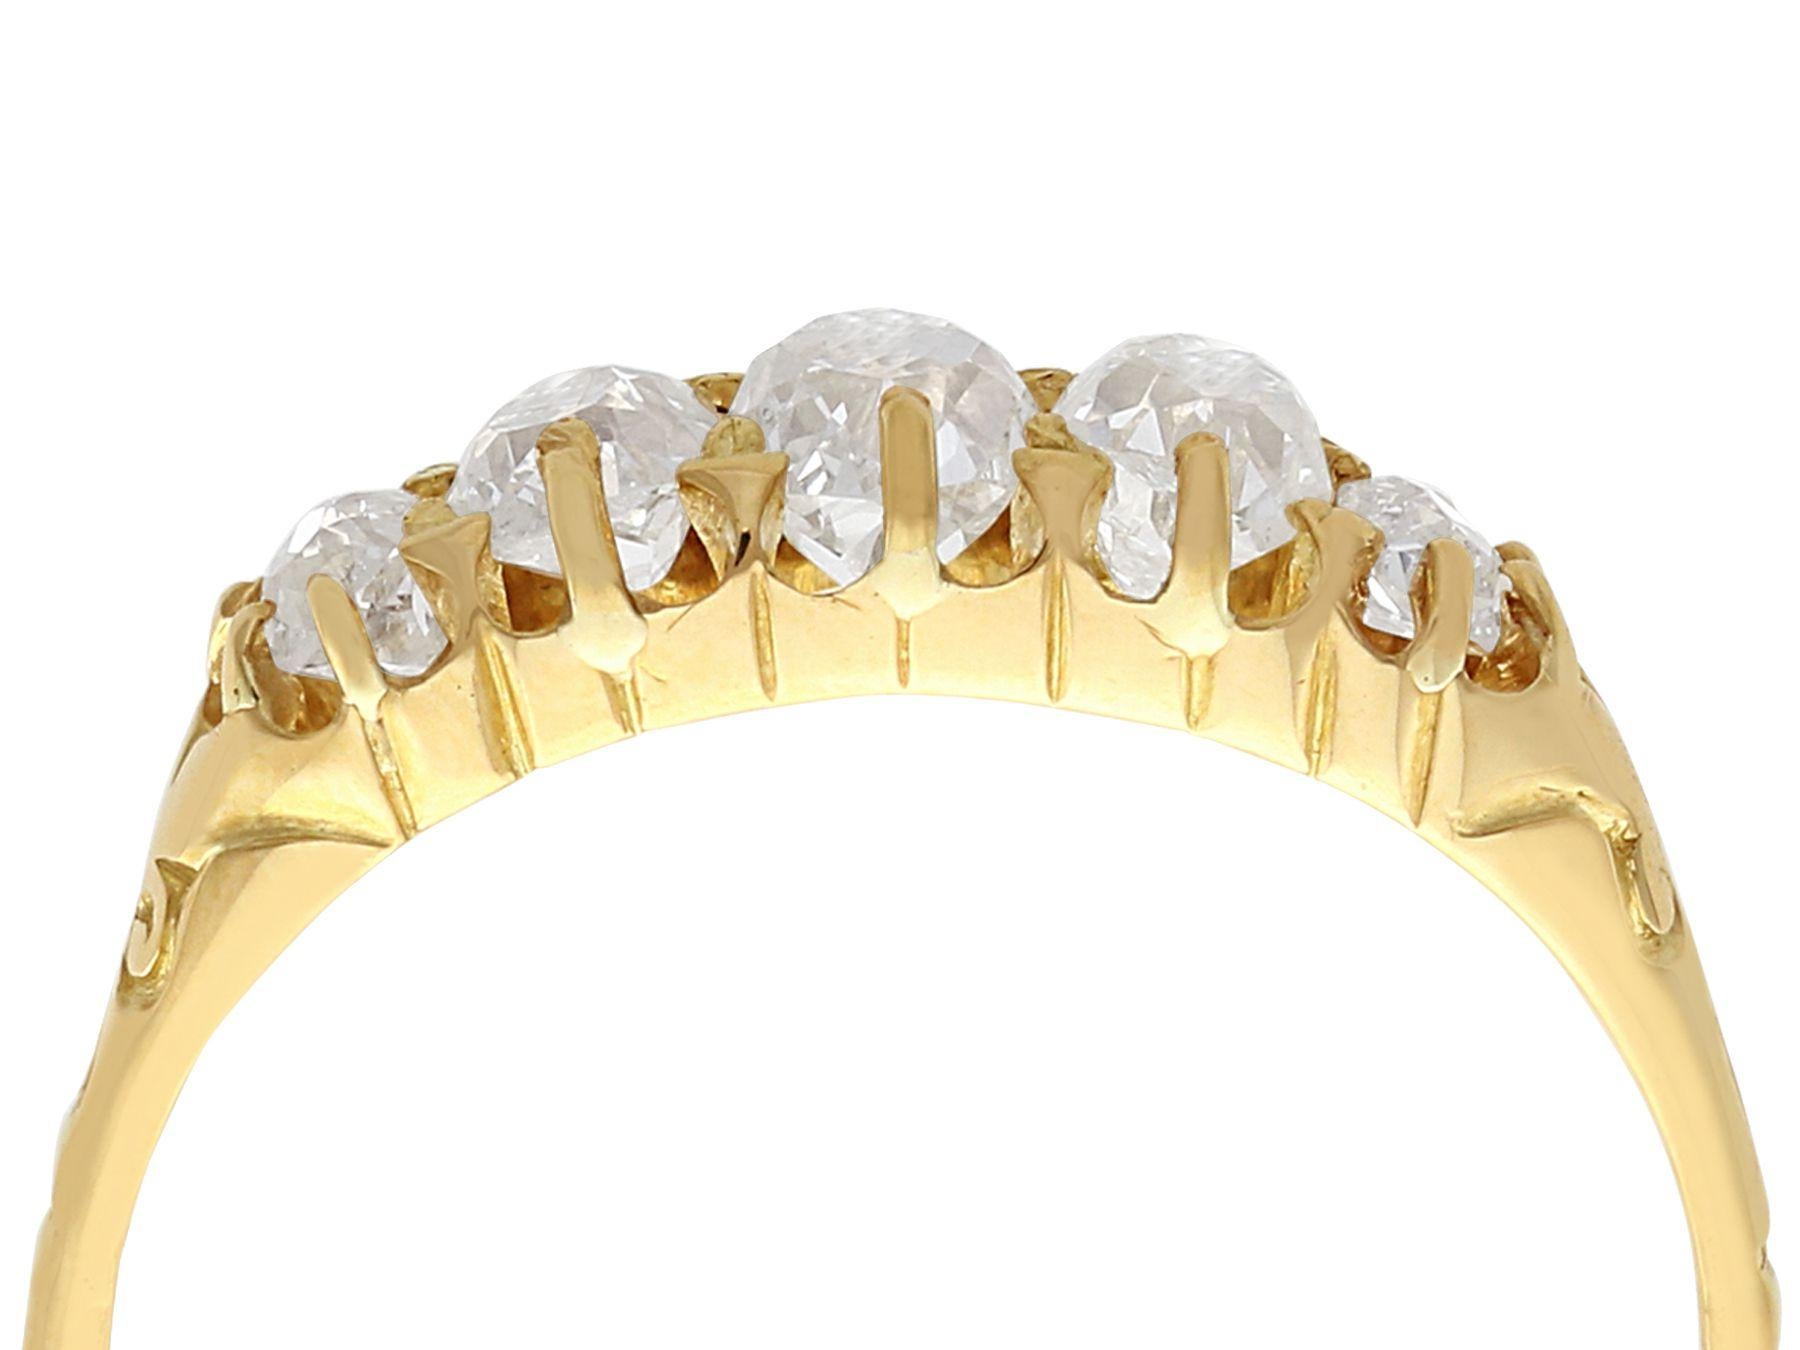 A fine and impressive antique 0.88 carat diamond and 18 karat yellow gold five stone ring; part of our antique jewelry and estate jewelry collections

This impressive antique five stone ring has been crafted in 18k yellow gold.

The elevated plain